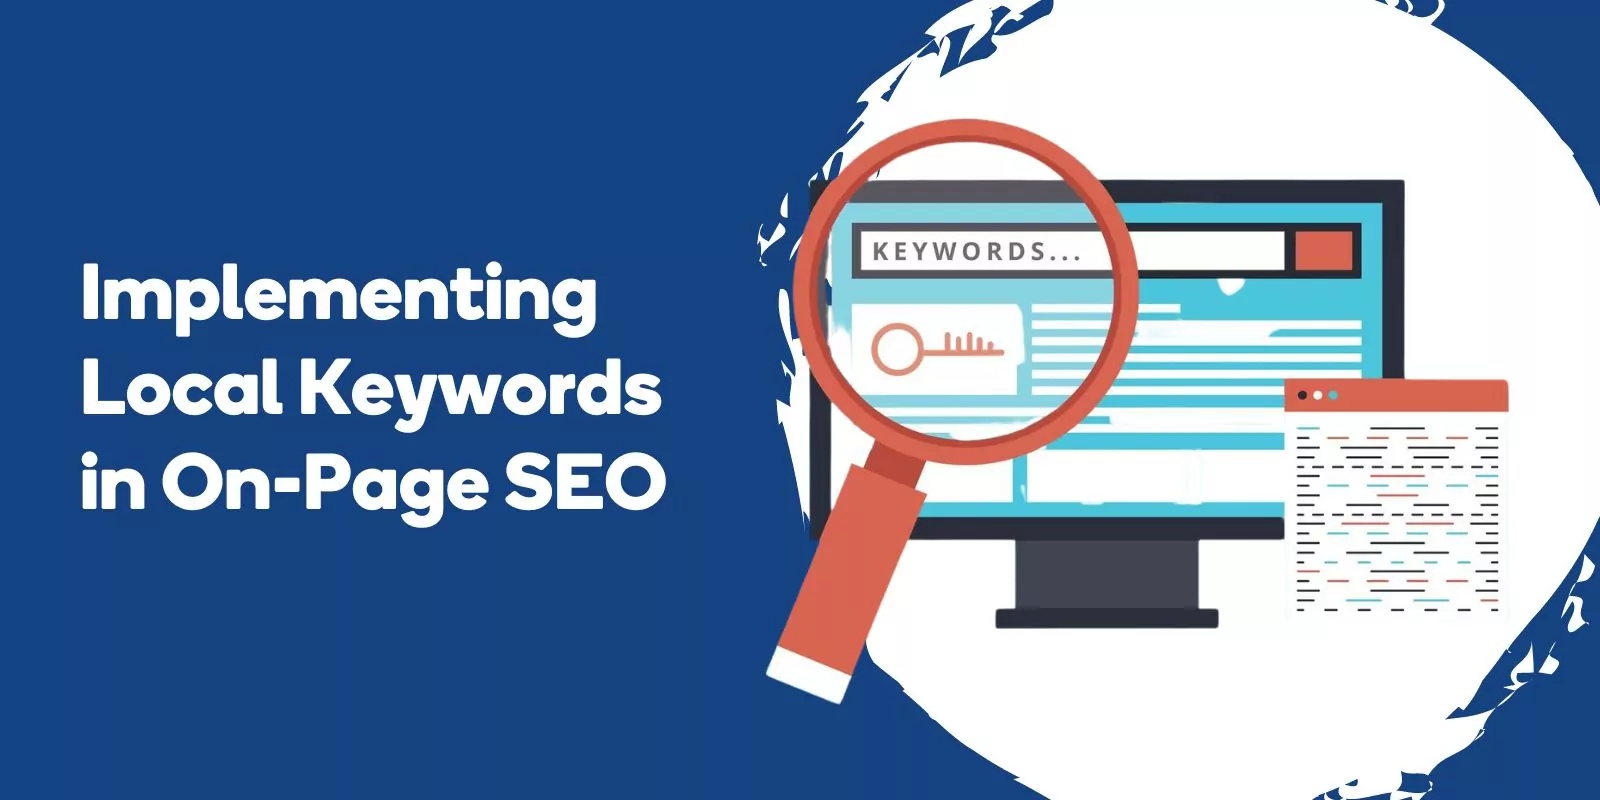 Implementing Local Keywords in On-Page SEO